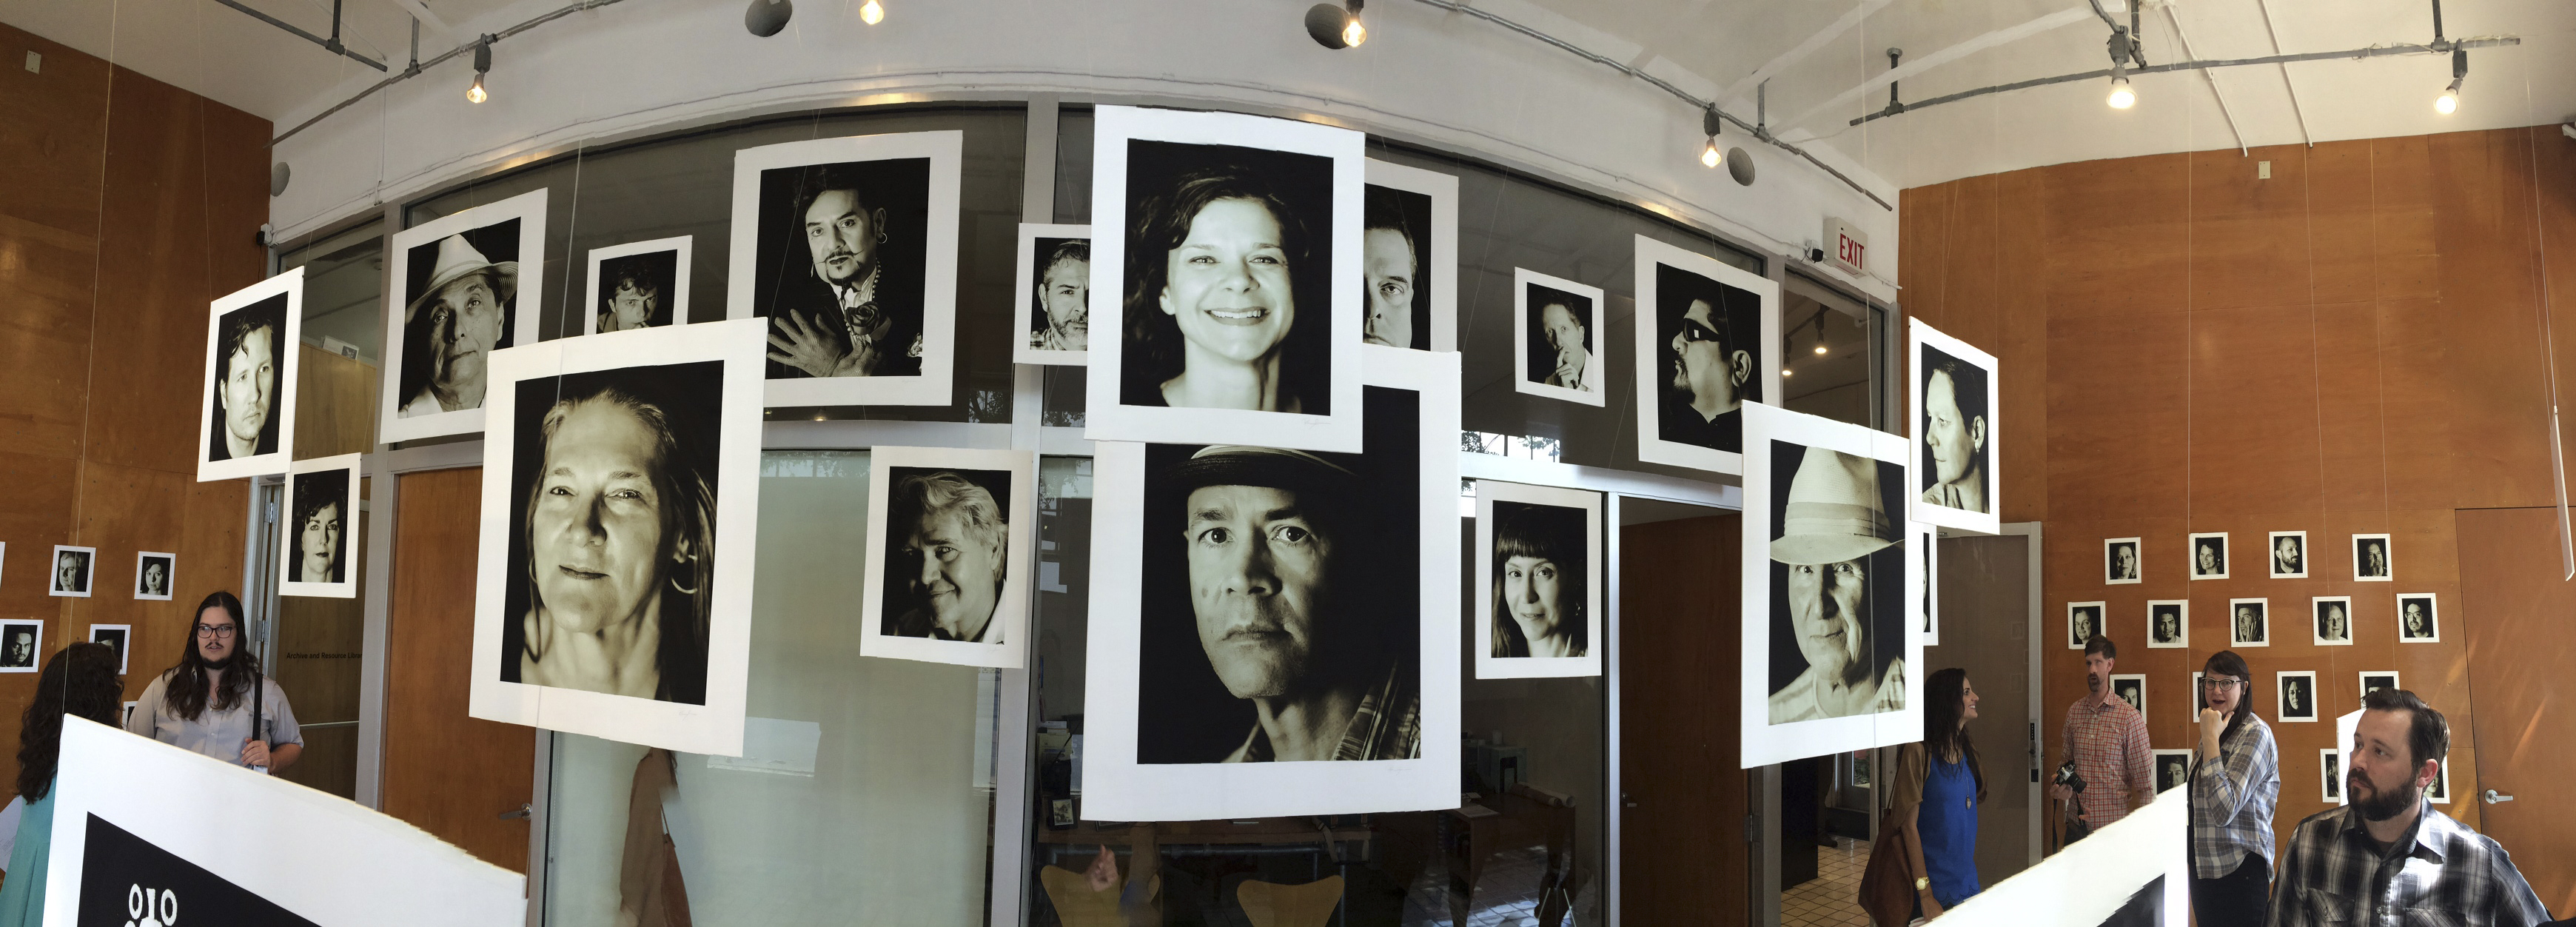 Faces of Artpace, 2016, panoramic view of installation at Artpace Window Works